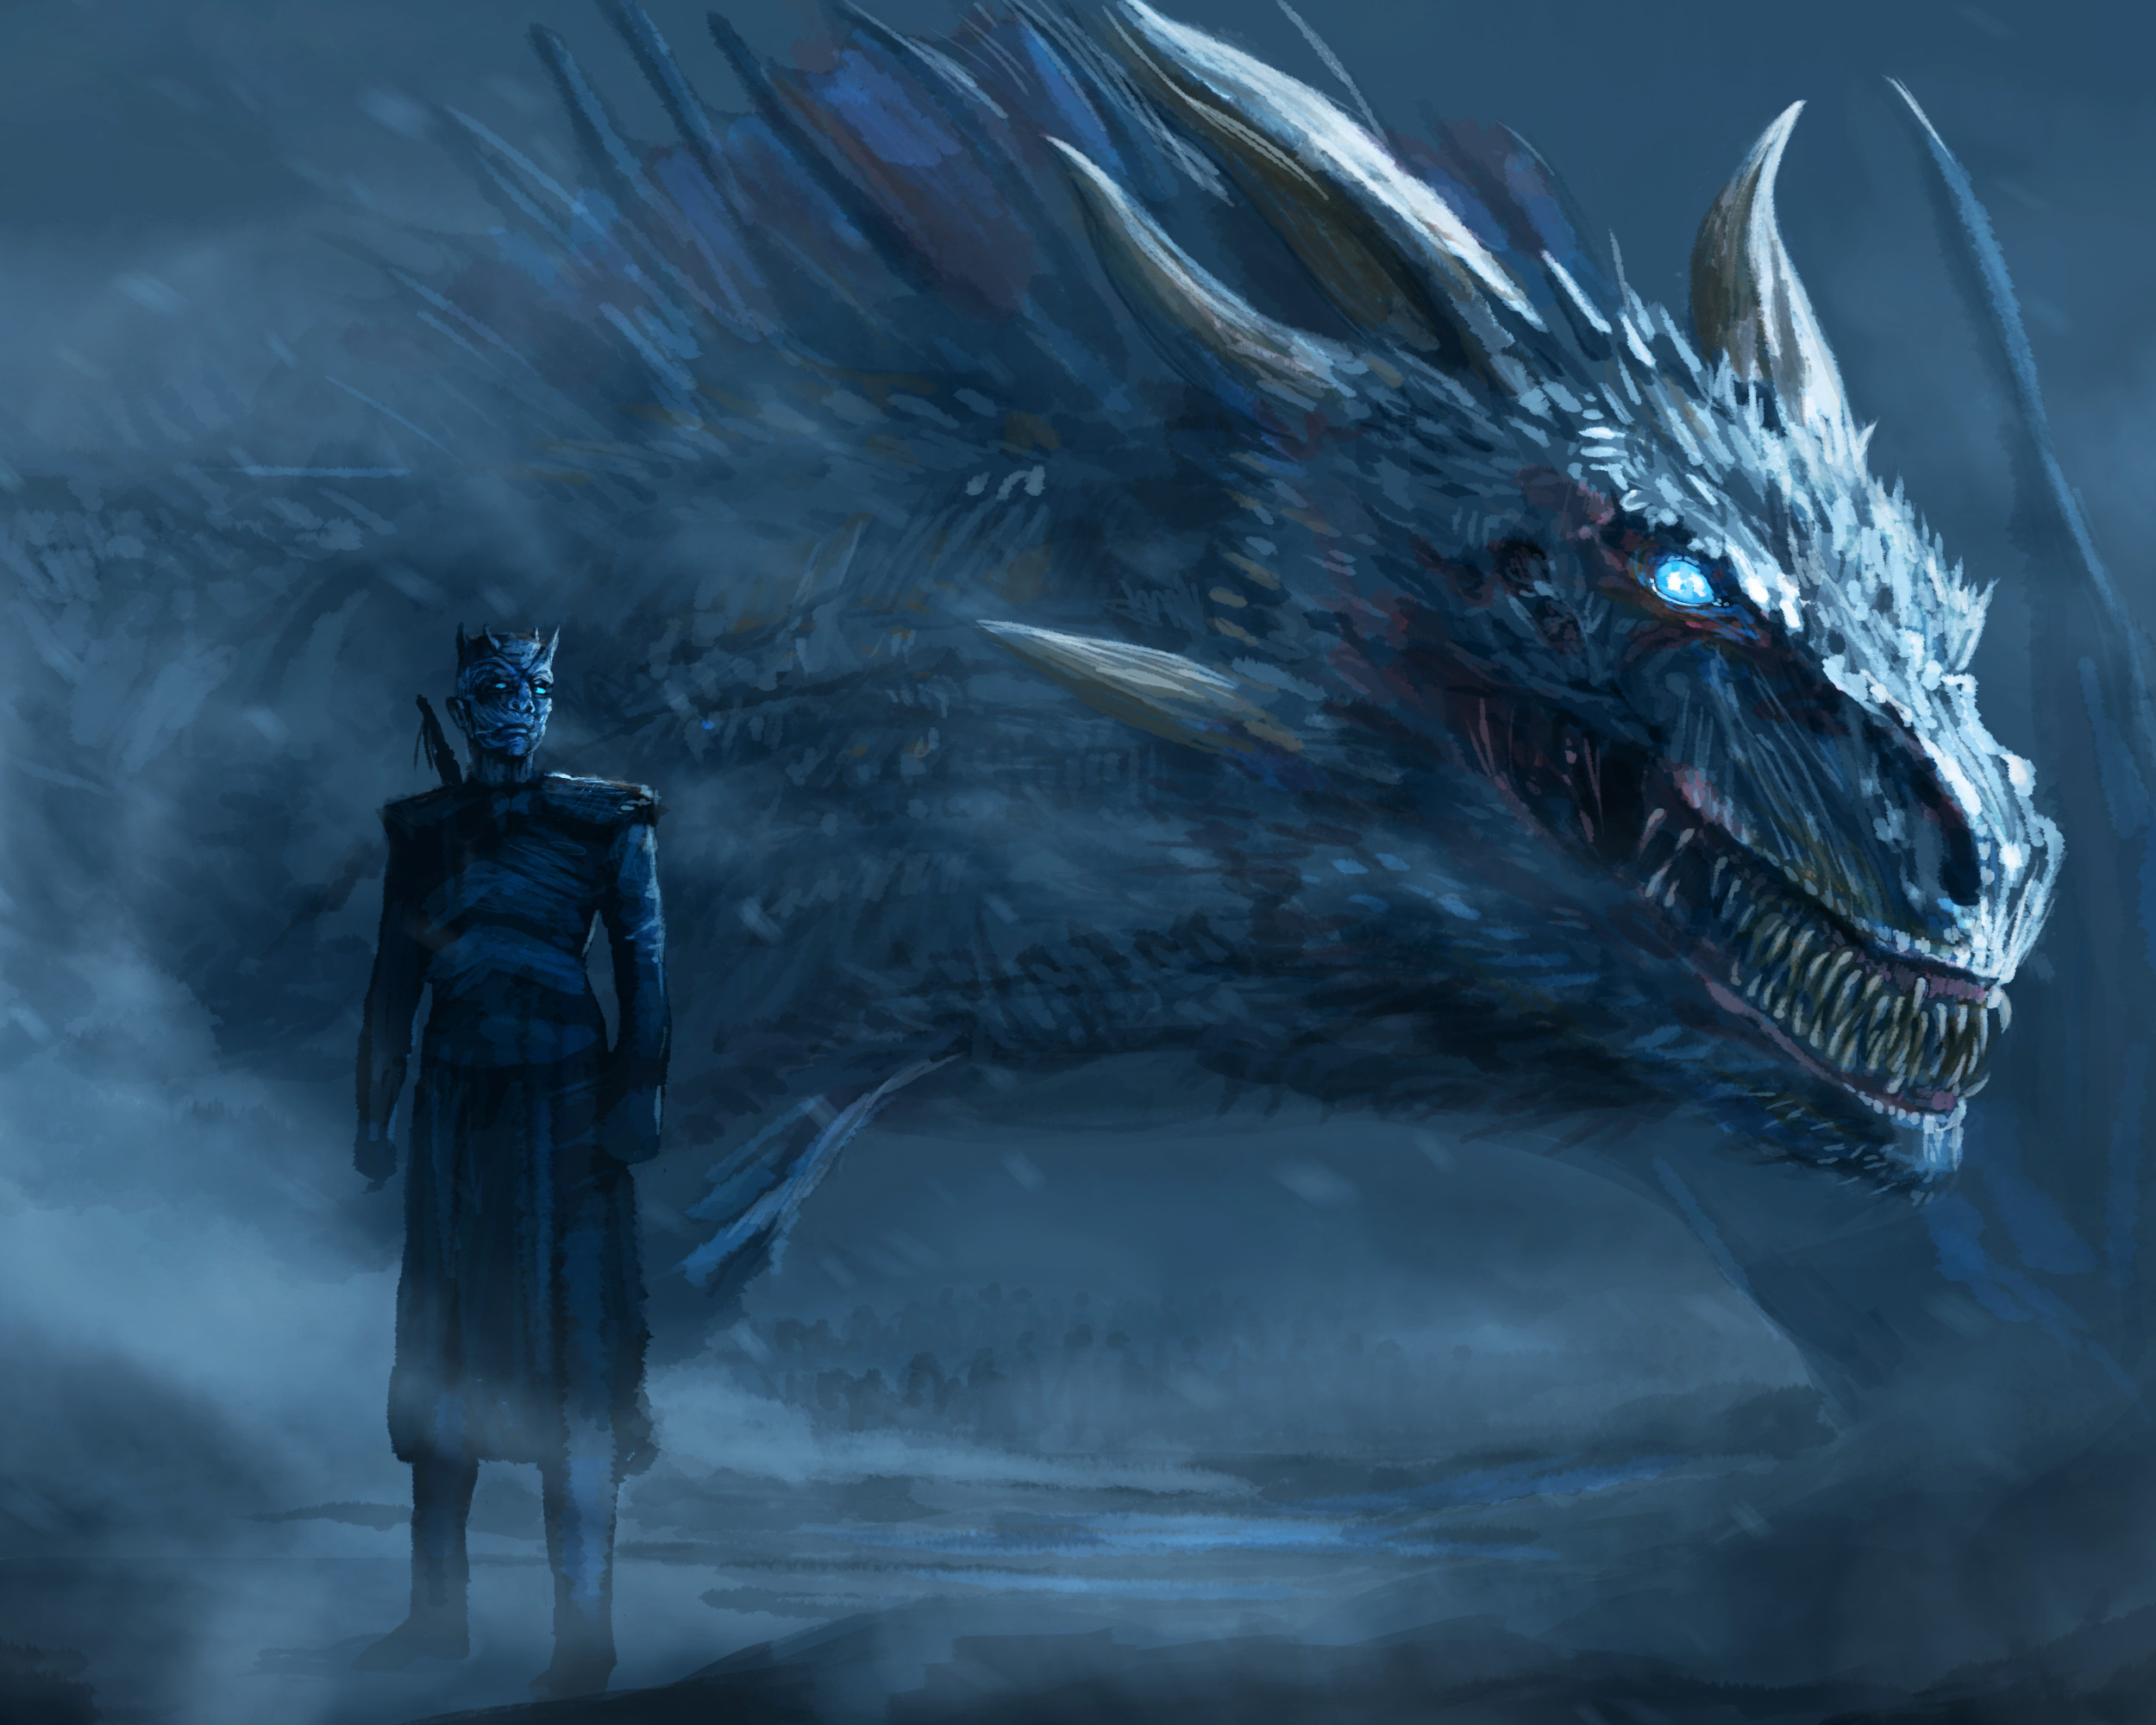 white walker wallpaper,dragon,cg artwork,darkness,fictional character,mythical creature